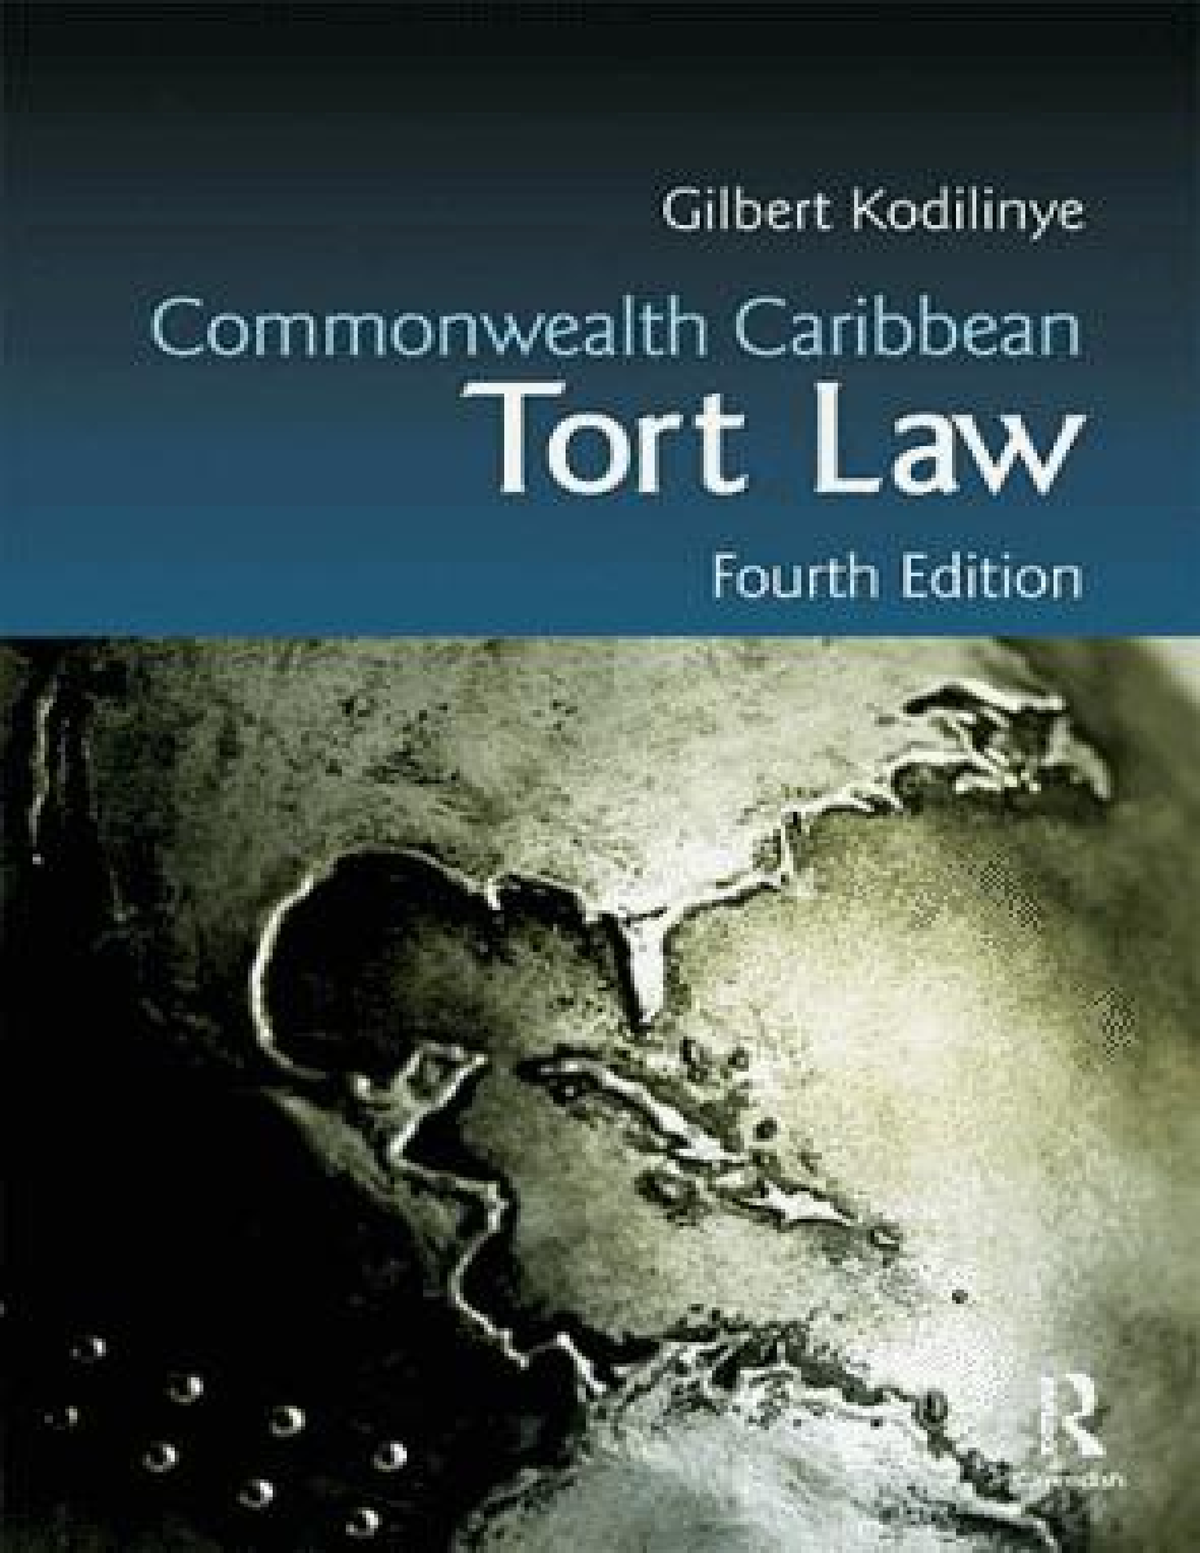 Commonwealth Caribbean Tort Law Fourth Edition Kod Commonwealth Caribbean Tort Law Fourth 